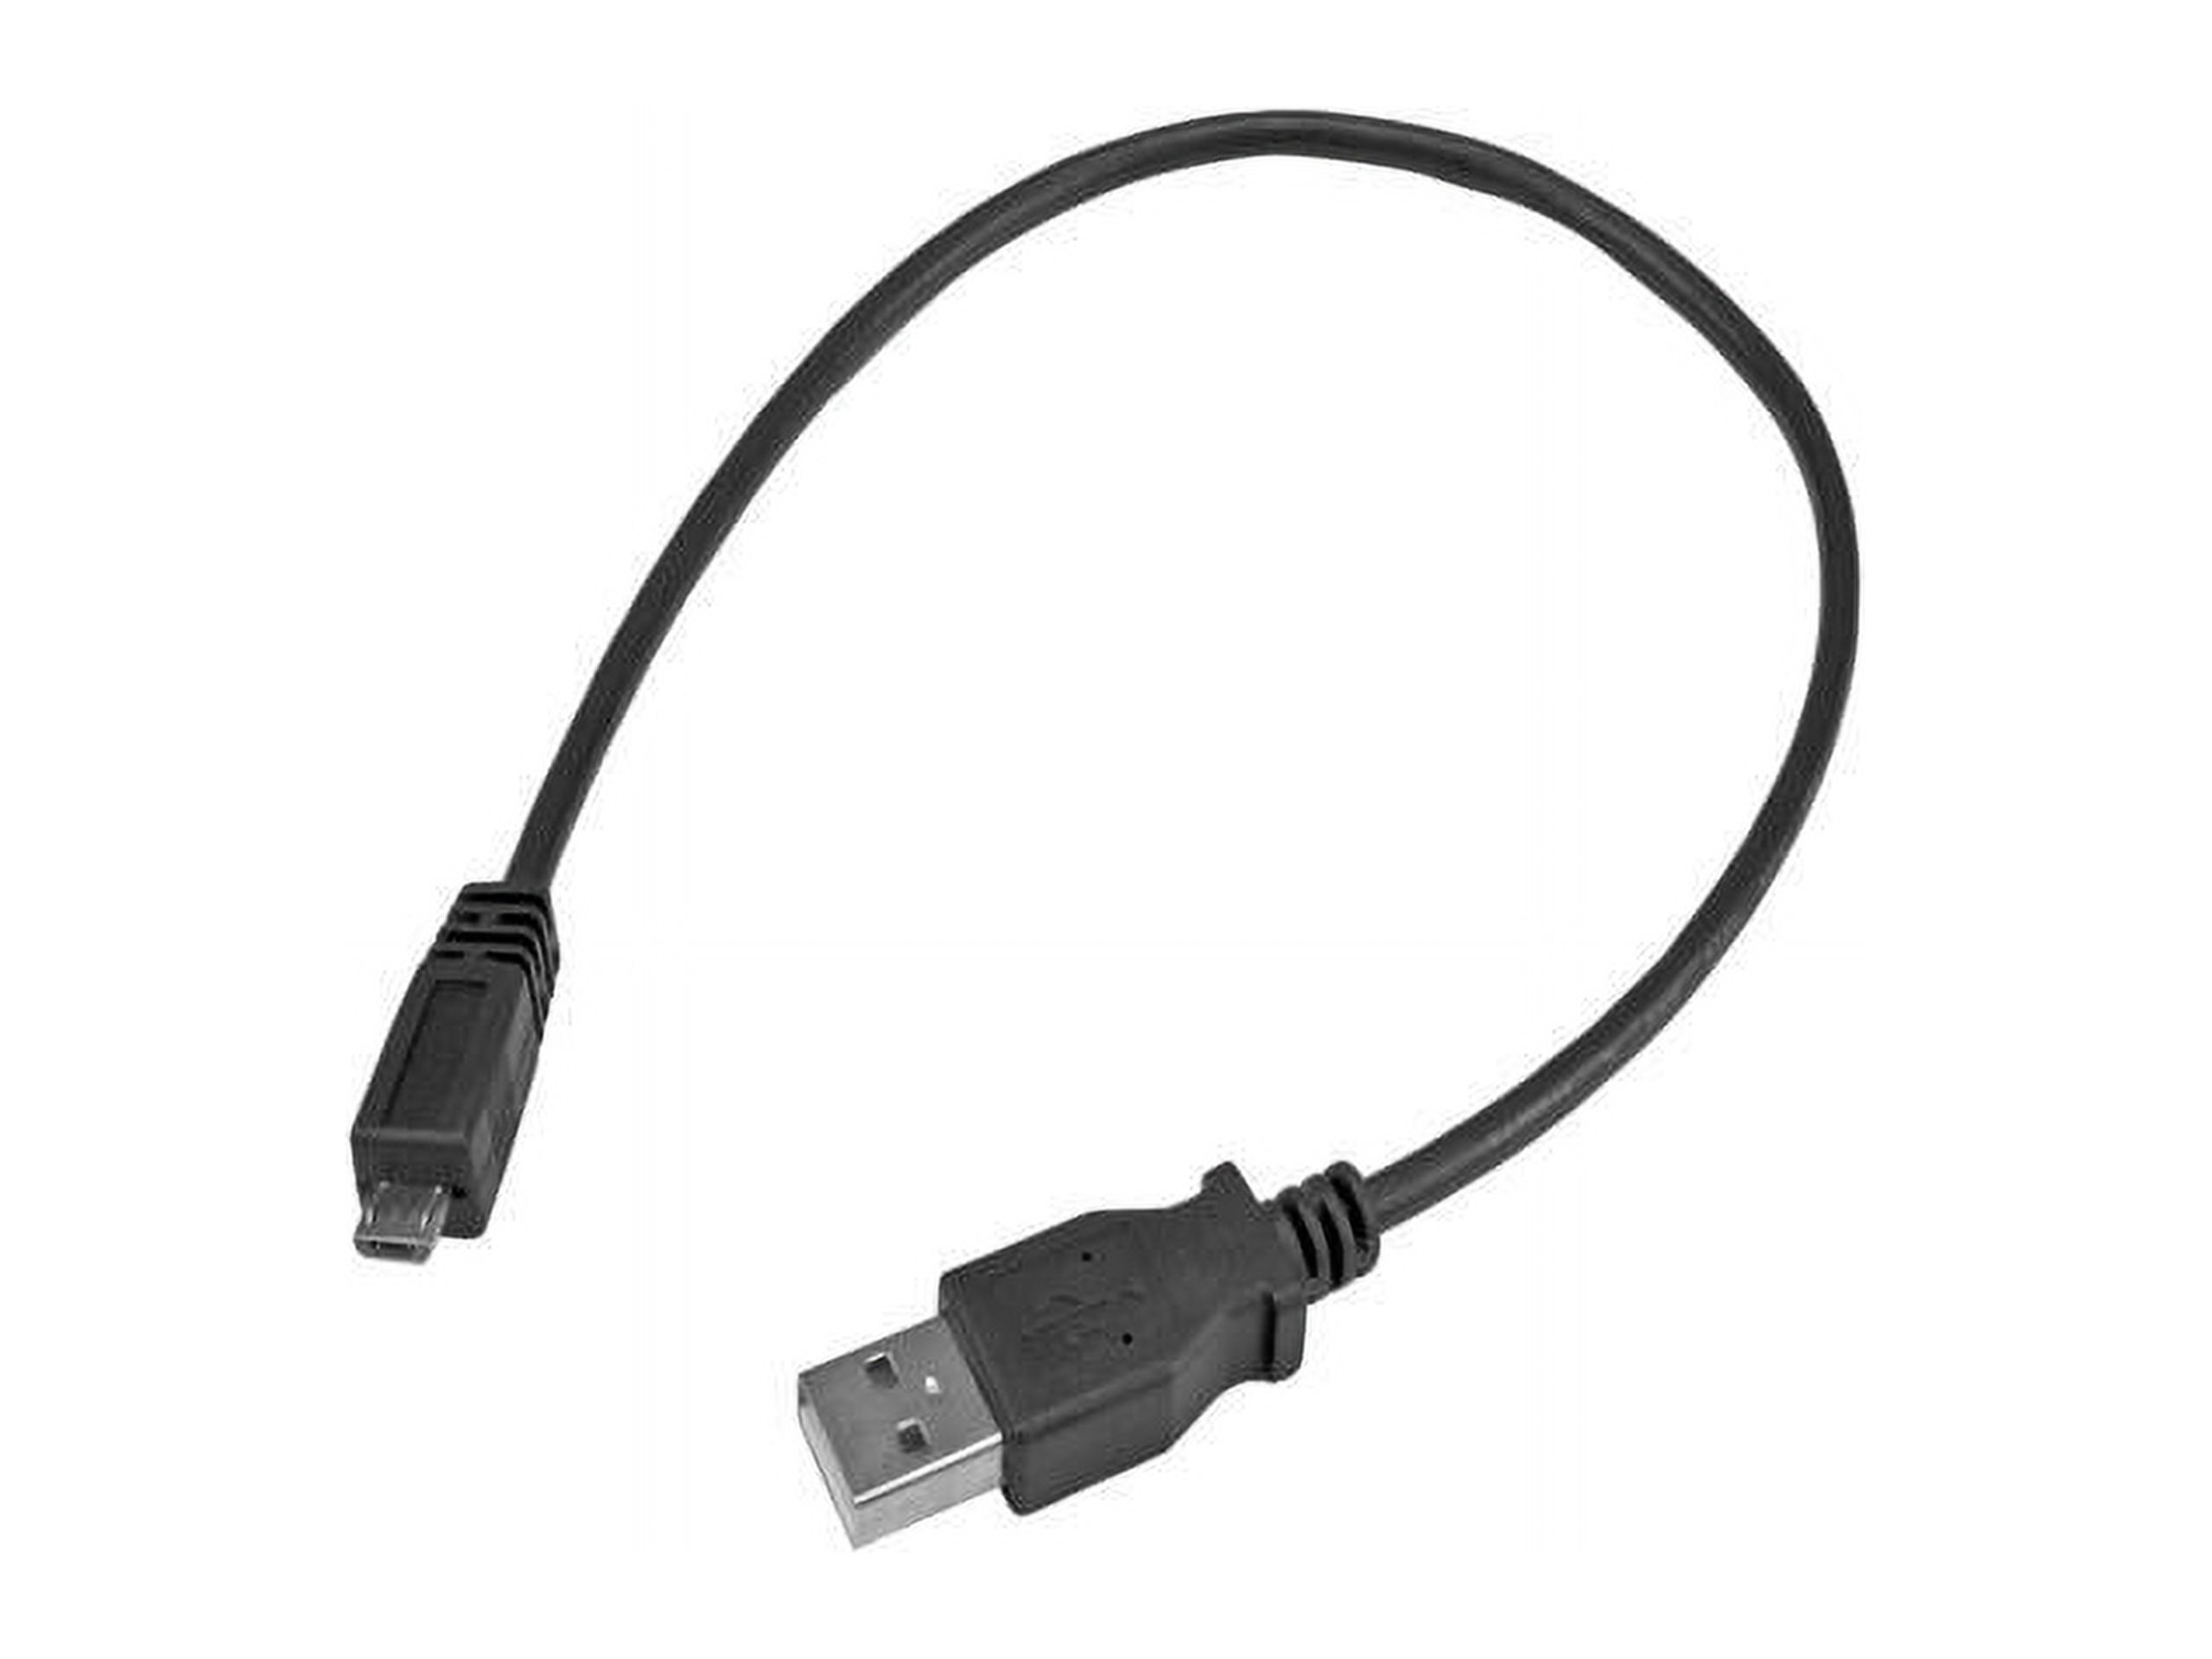 StarTech.com UUSBHAUB1 USB to Micro USB Cable - 1 ft -  Micro USB Cable - A to Micro B - USB to Micro USB Charging Cable - USB Phone Charger Cable - image 5 of 5